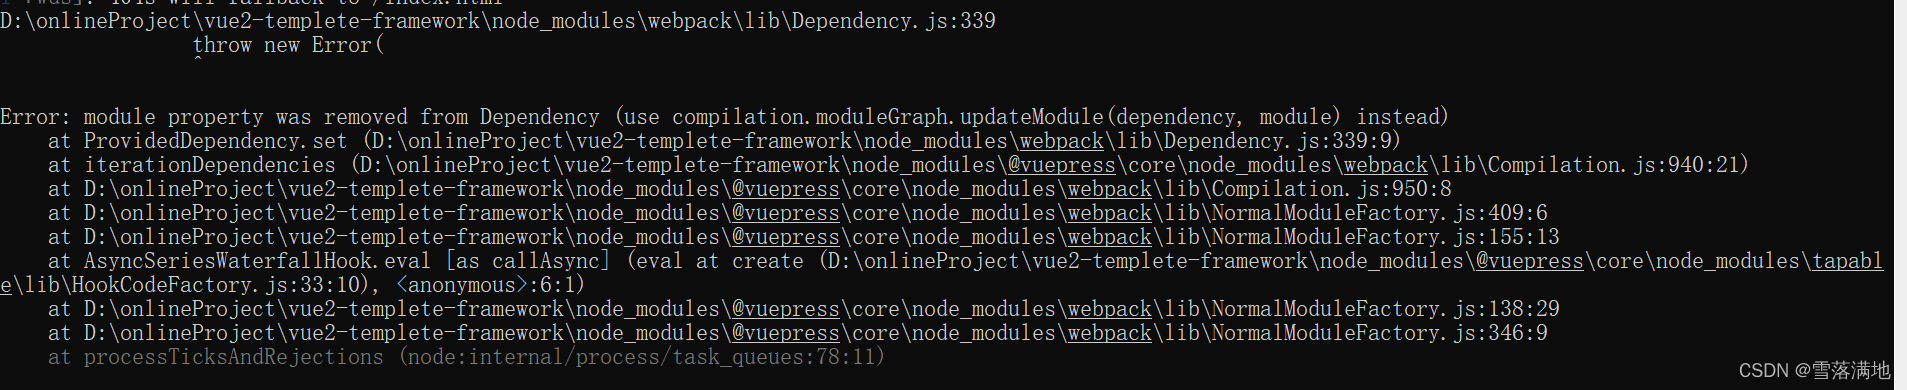 npm run dev 报错     Error: module property was removed from Dependency